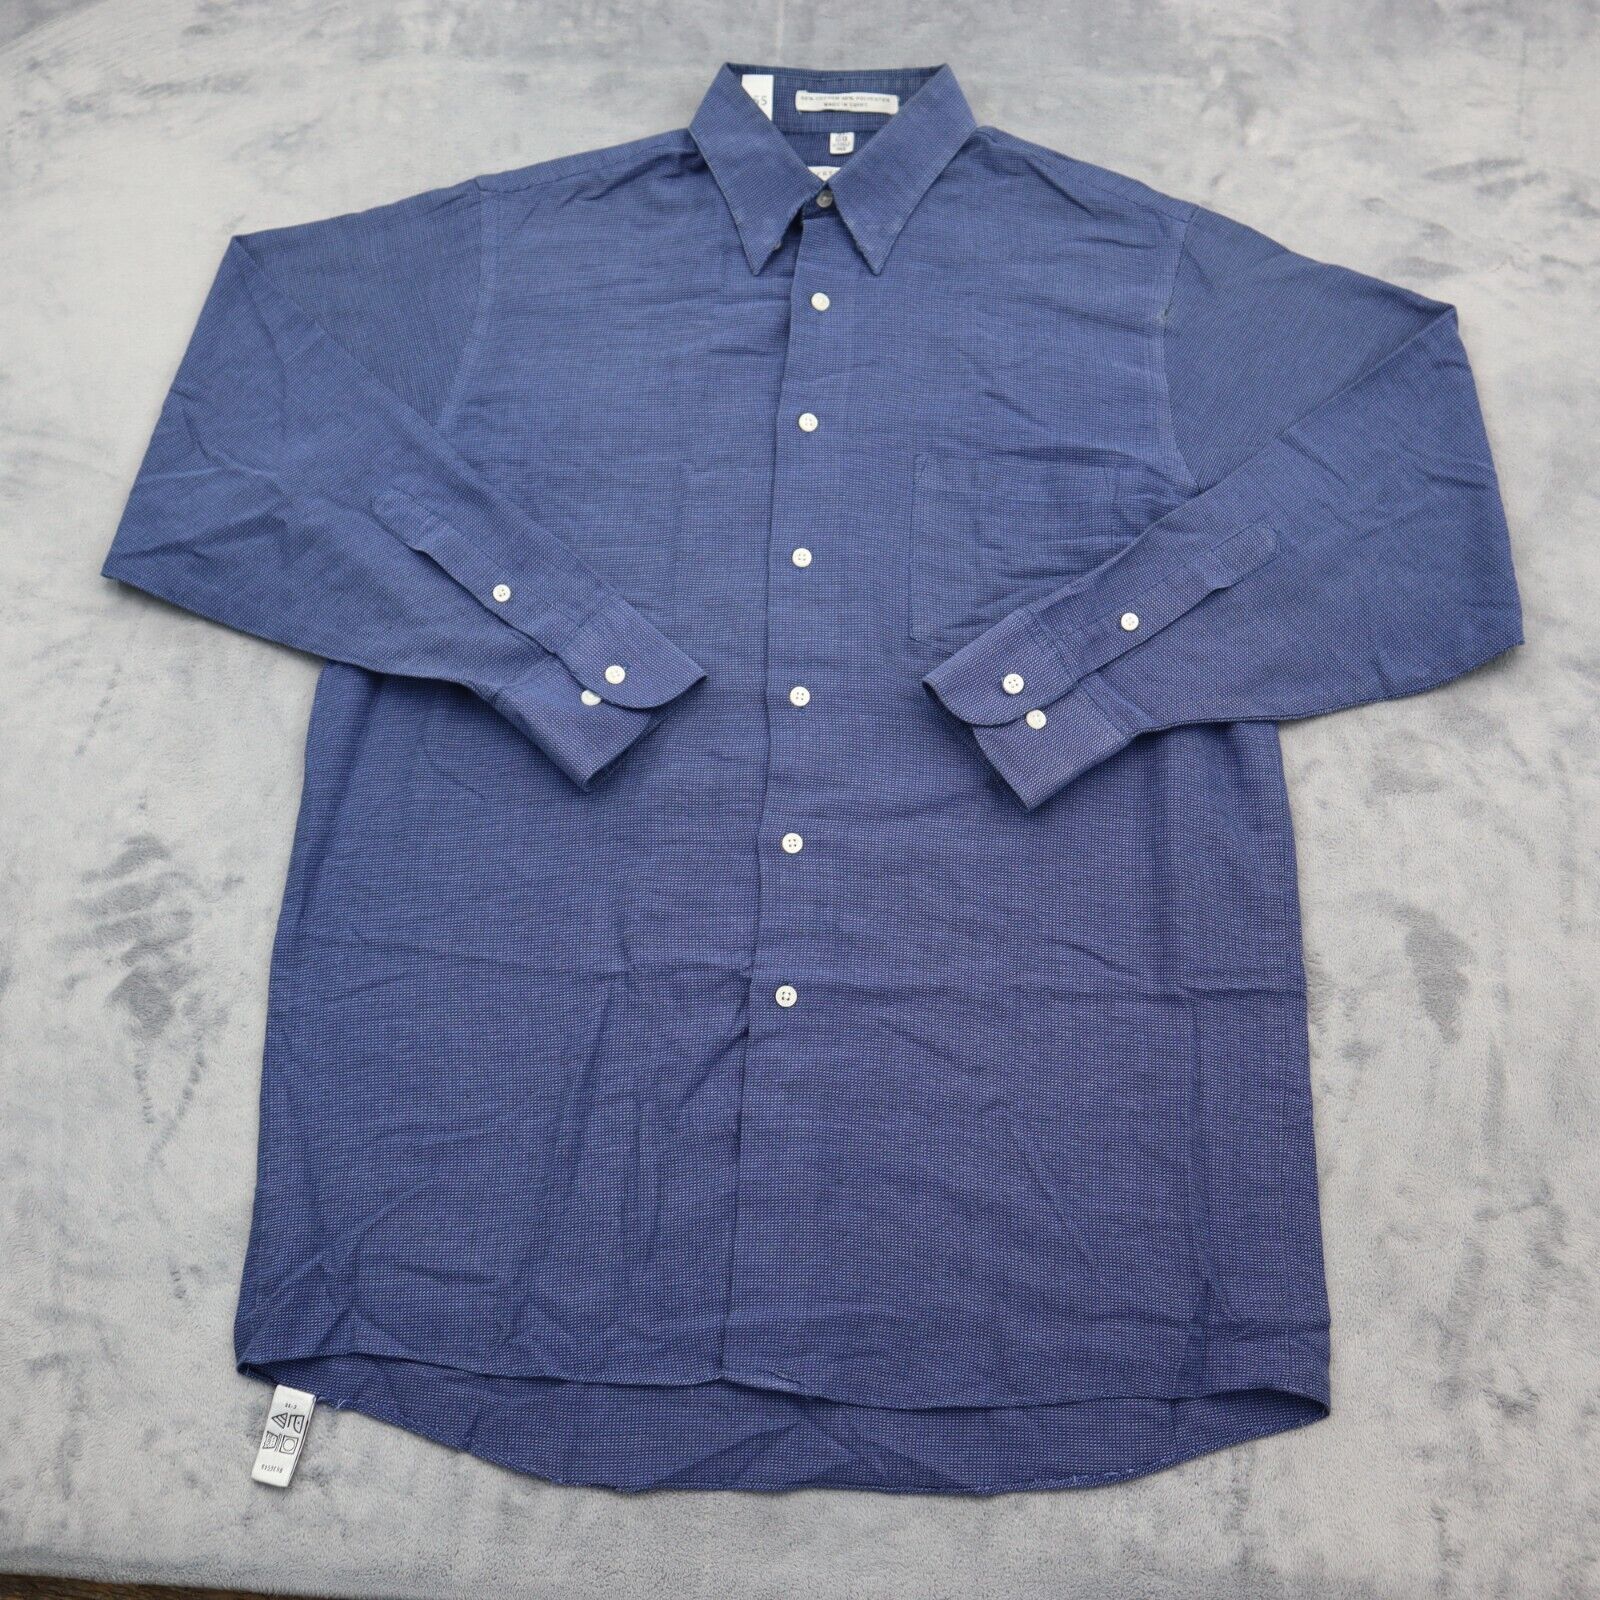 Primary image for Geoffrey Beene Shirt Mens 15 1/2 32 33 Blue Button Down Dress Long Sleeve 